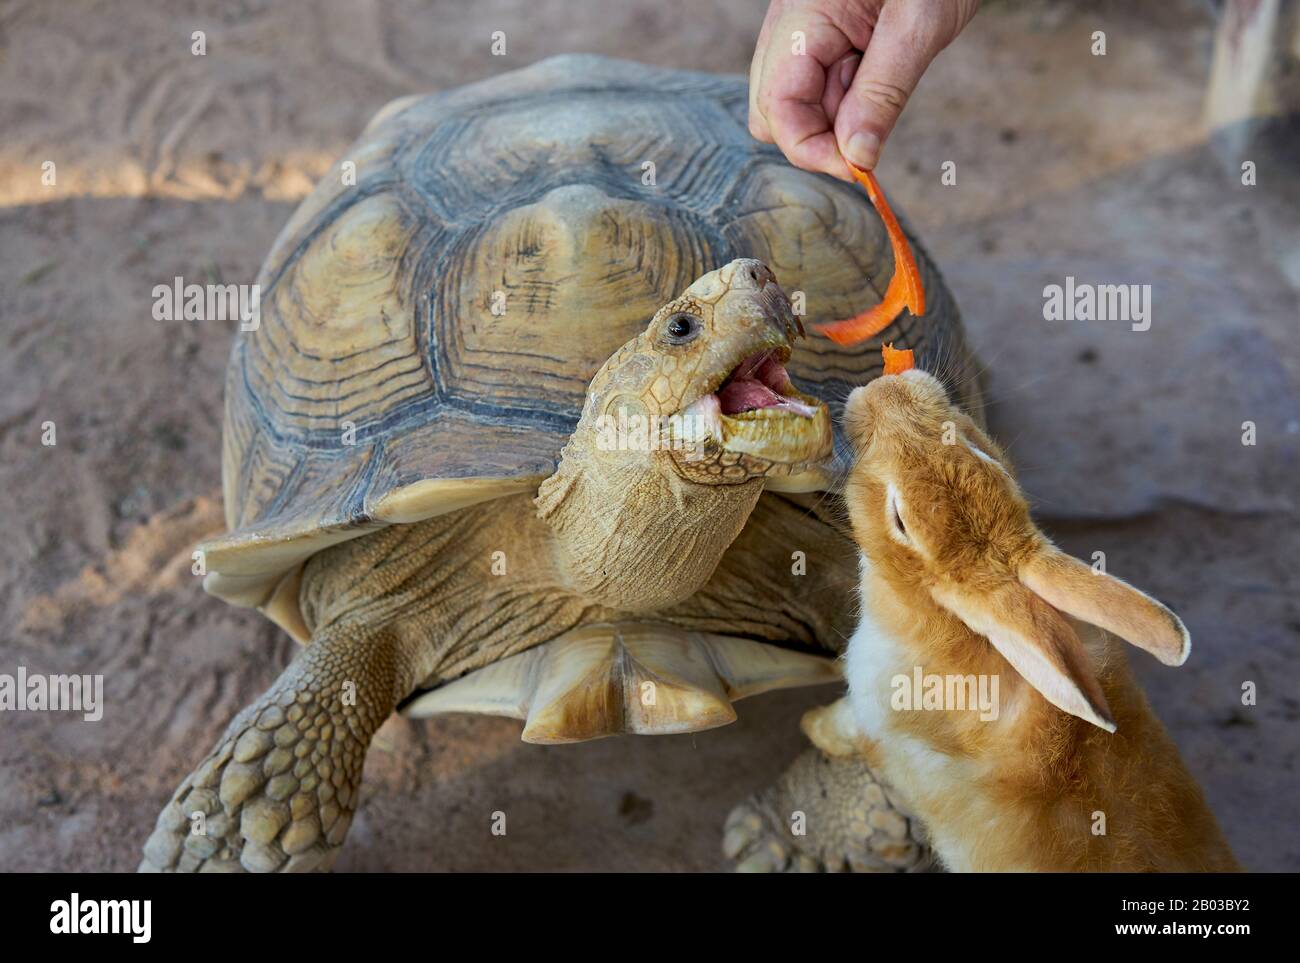 A rabbit and a turtle eating a carrot. Stock Photo